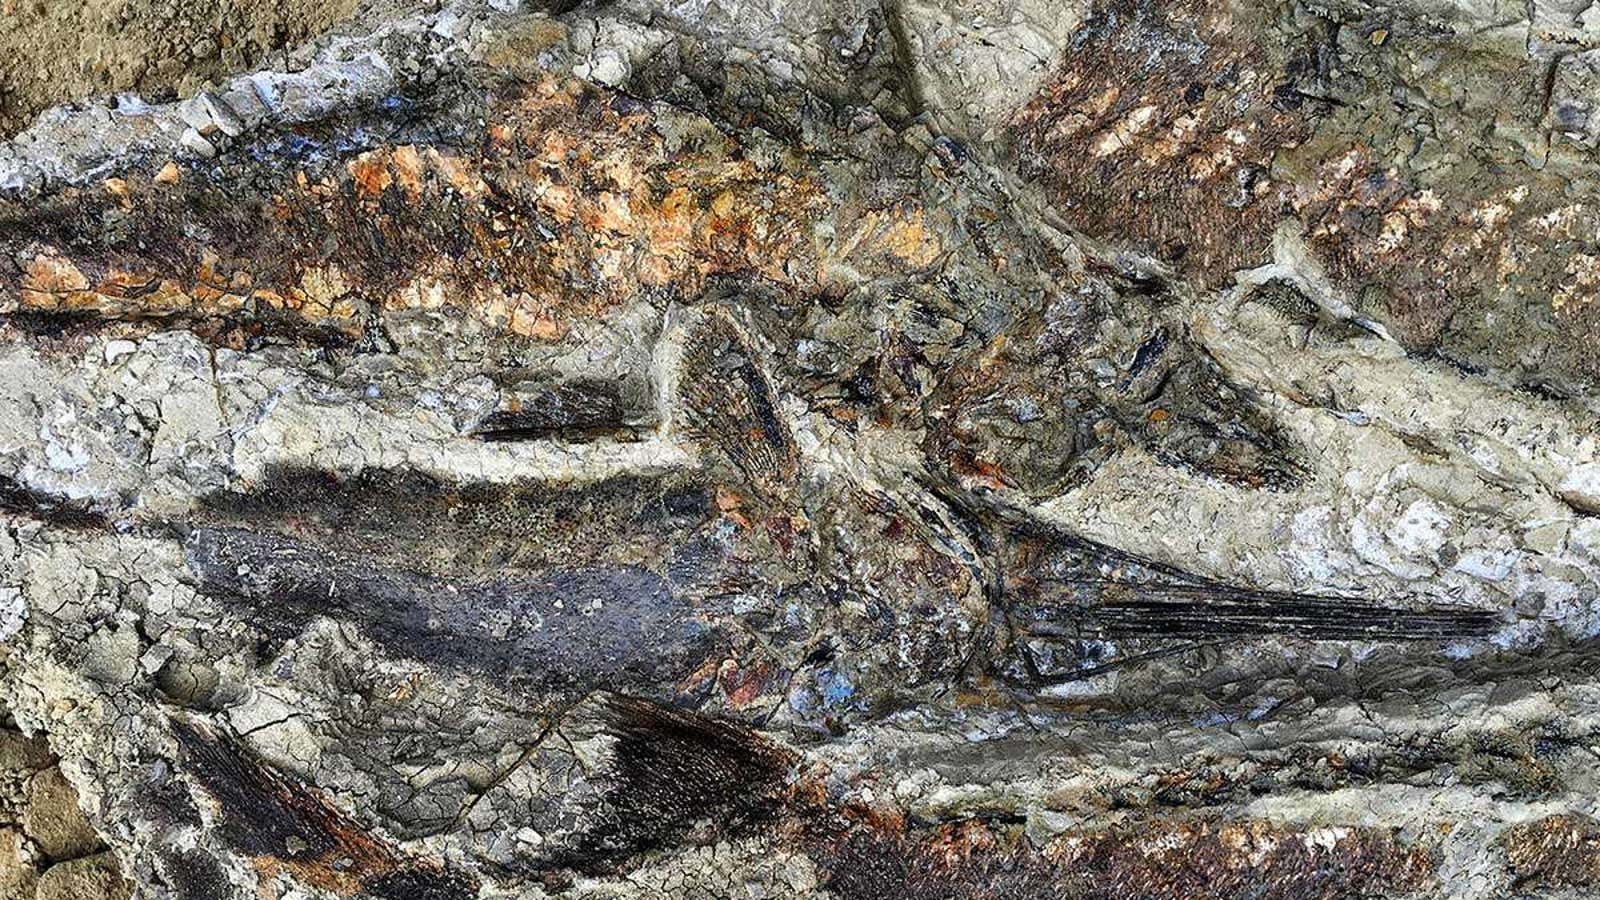 A fossil graveyard reportedly tells the story of the death of dinosaurs.